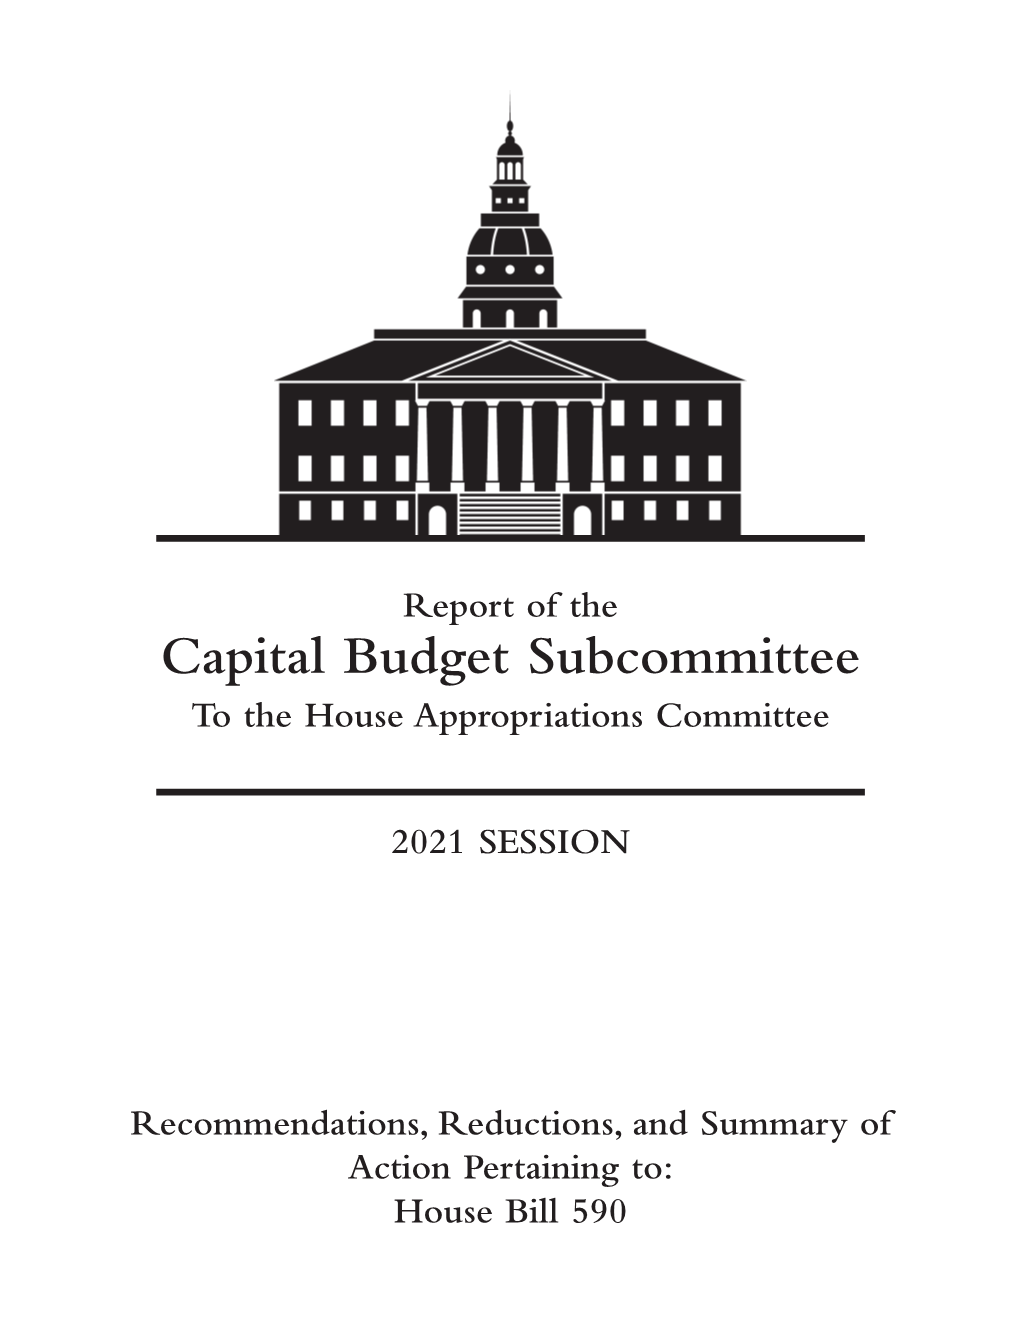 Capital House Budget Subcommittee